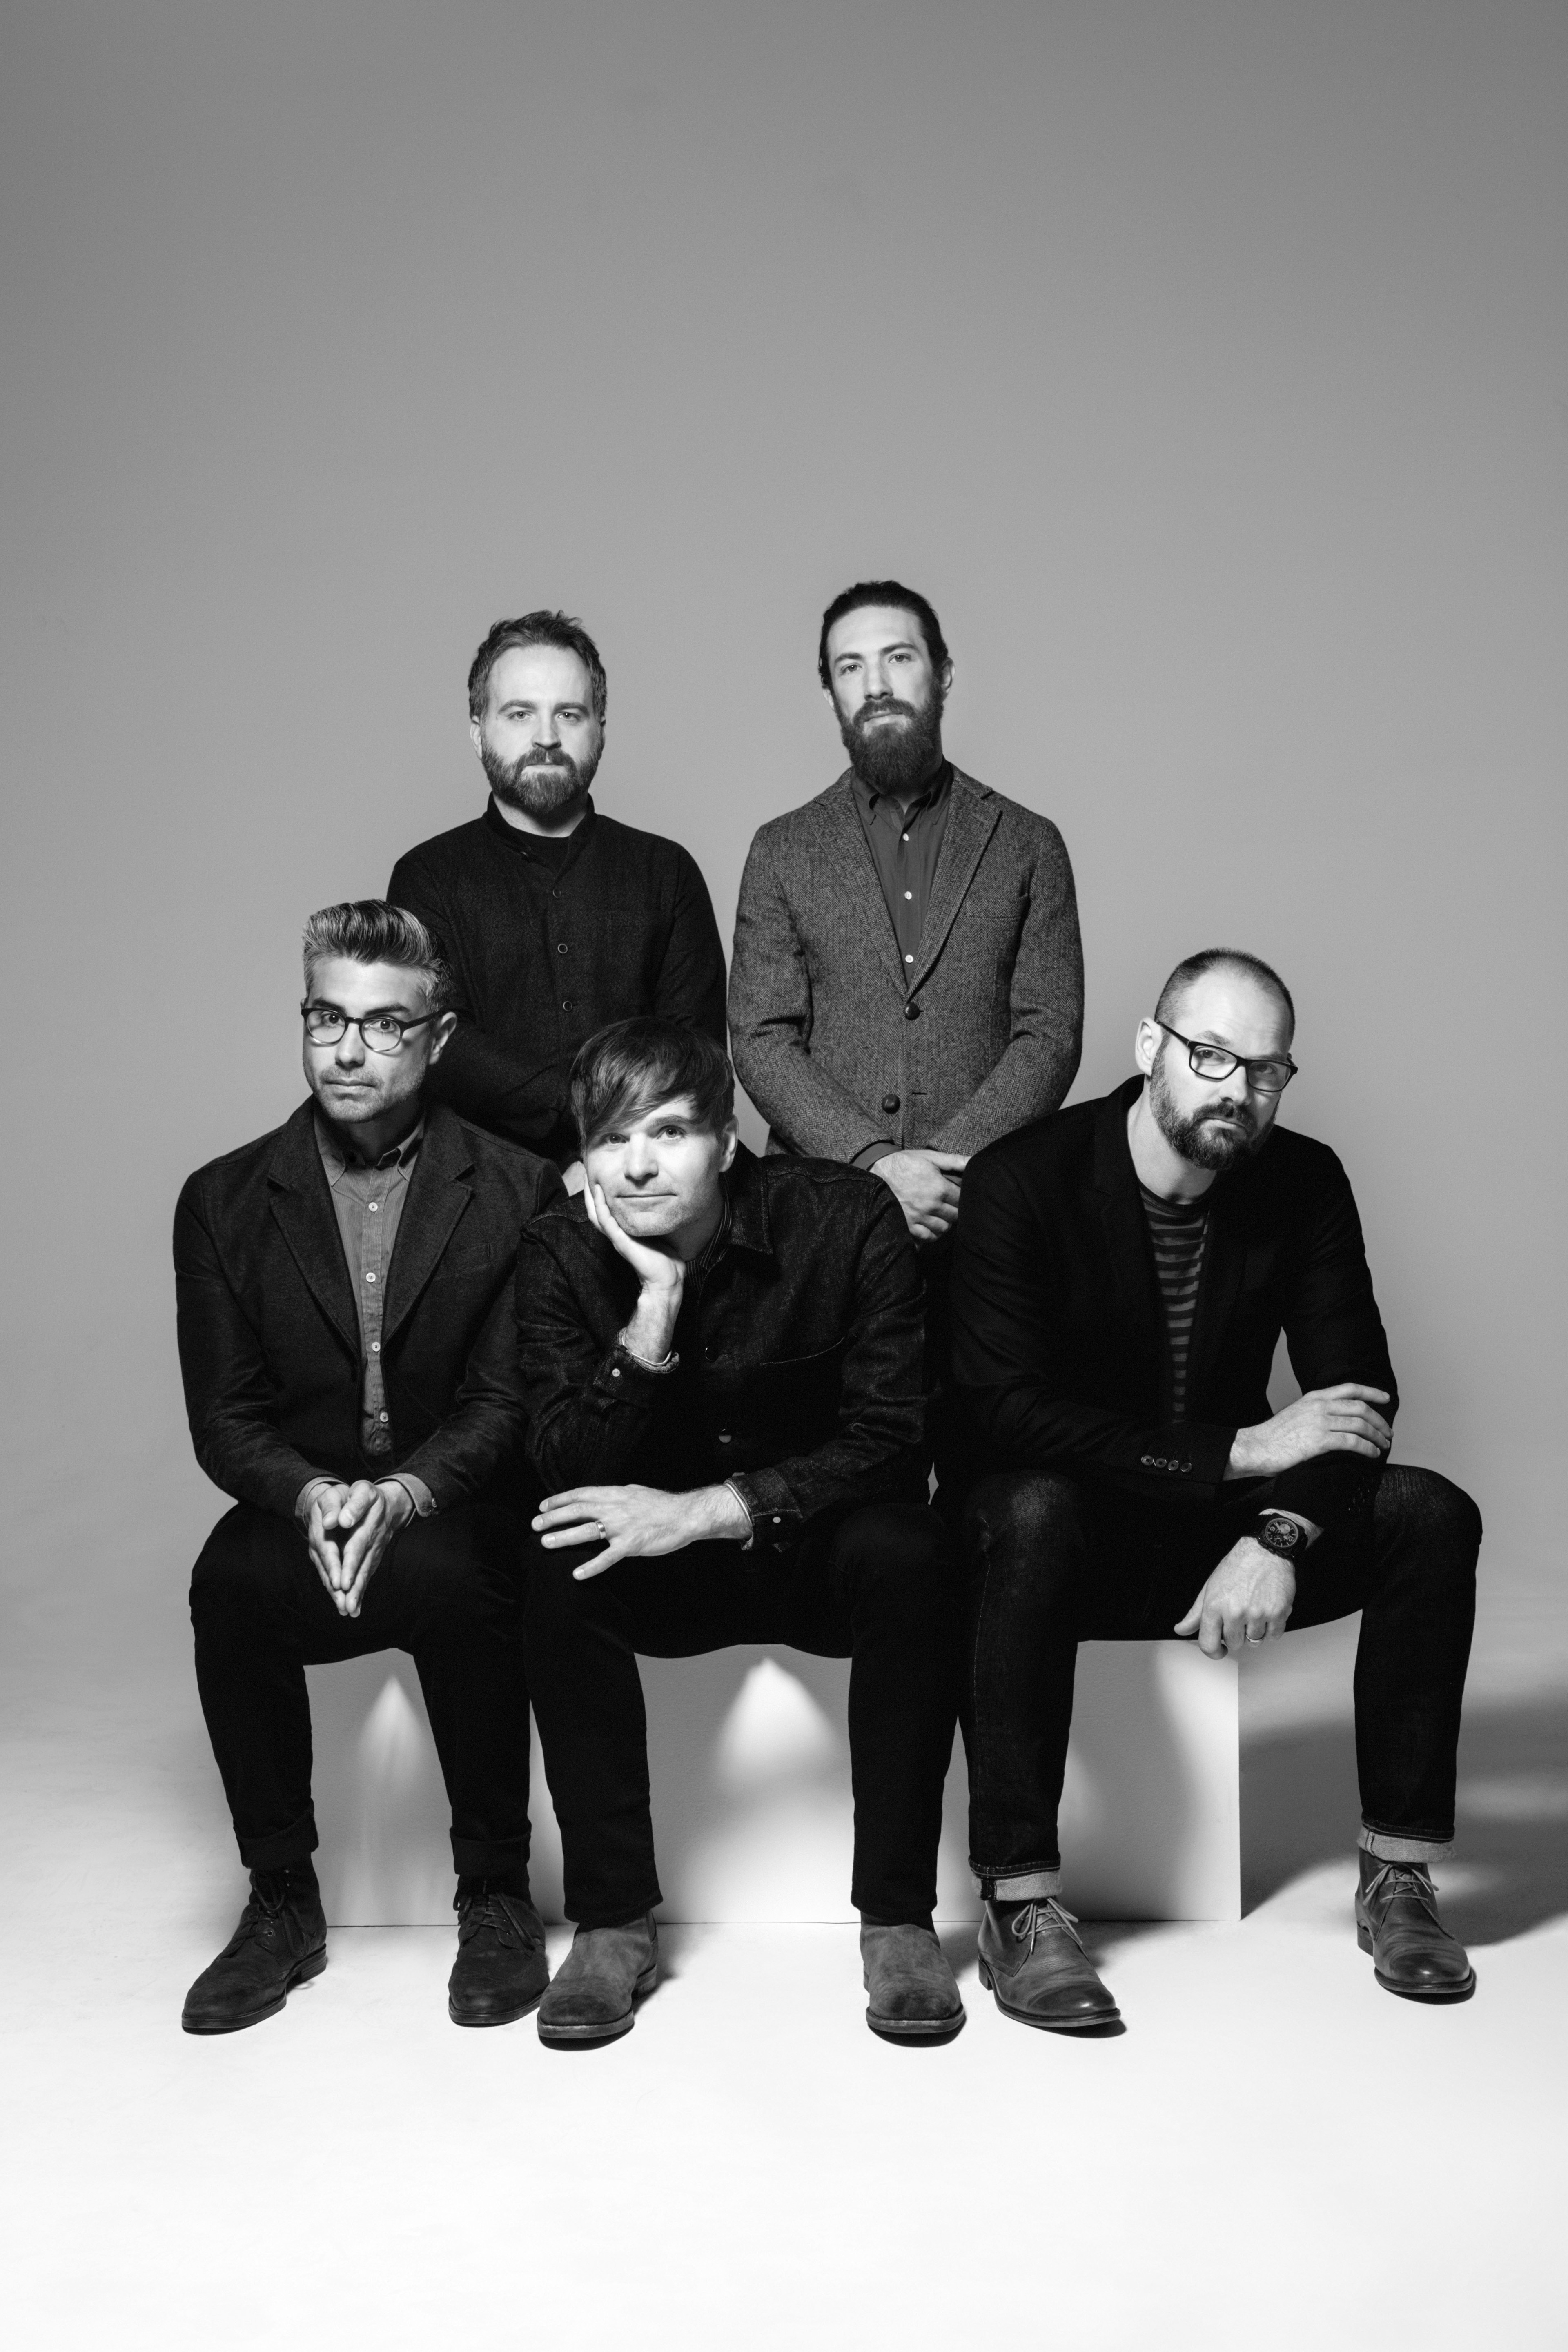 Death Cab for Cutie Announce New Album and Single, “Gold Rush”